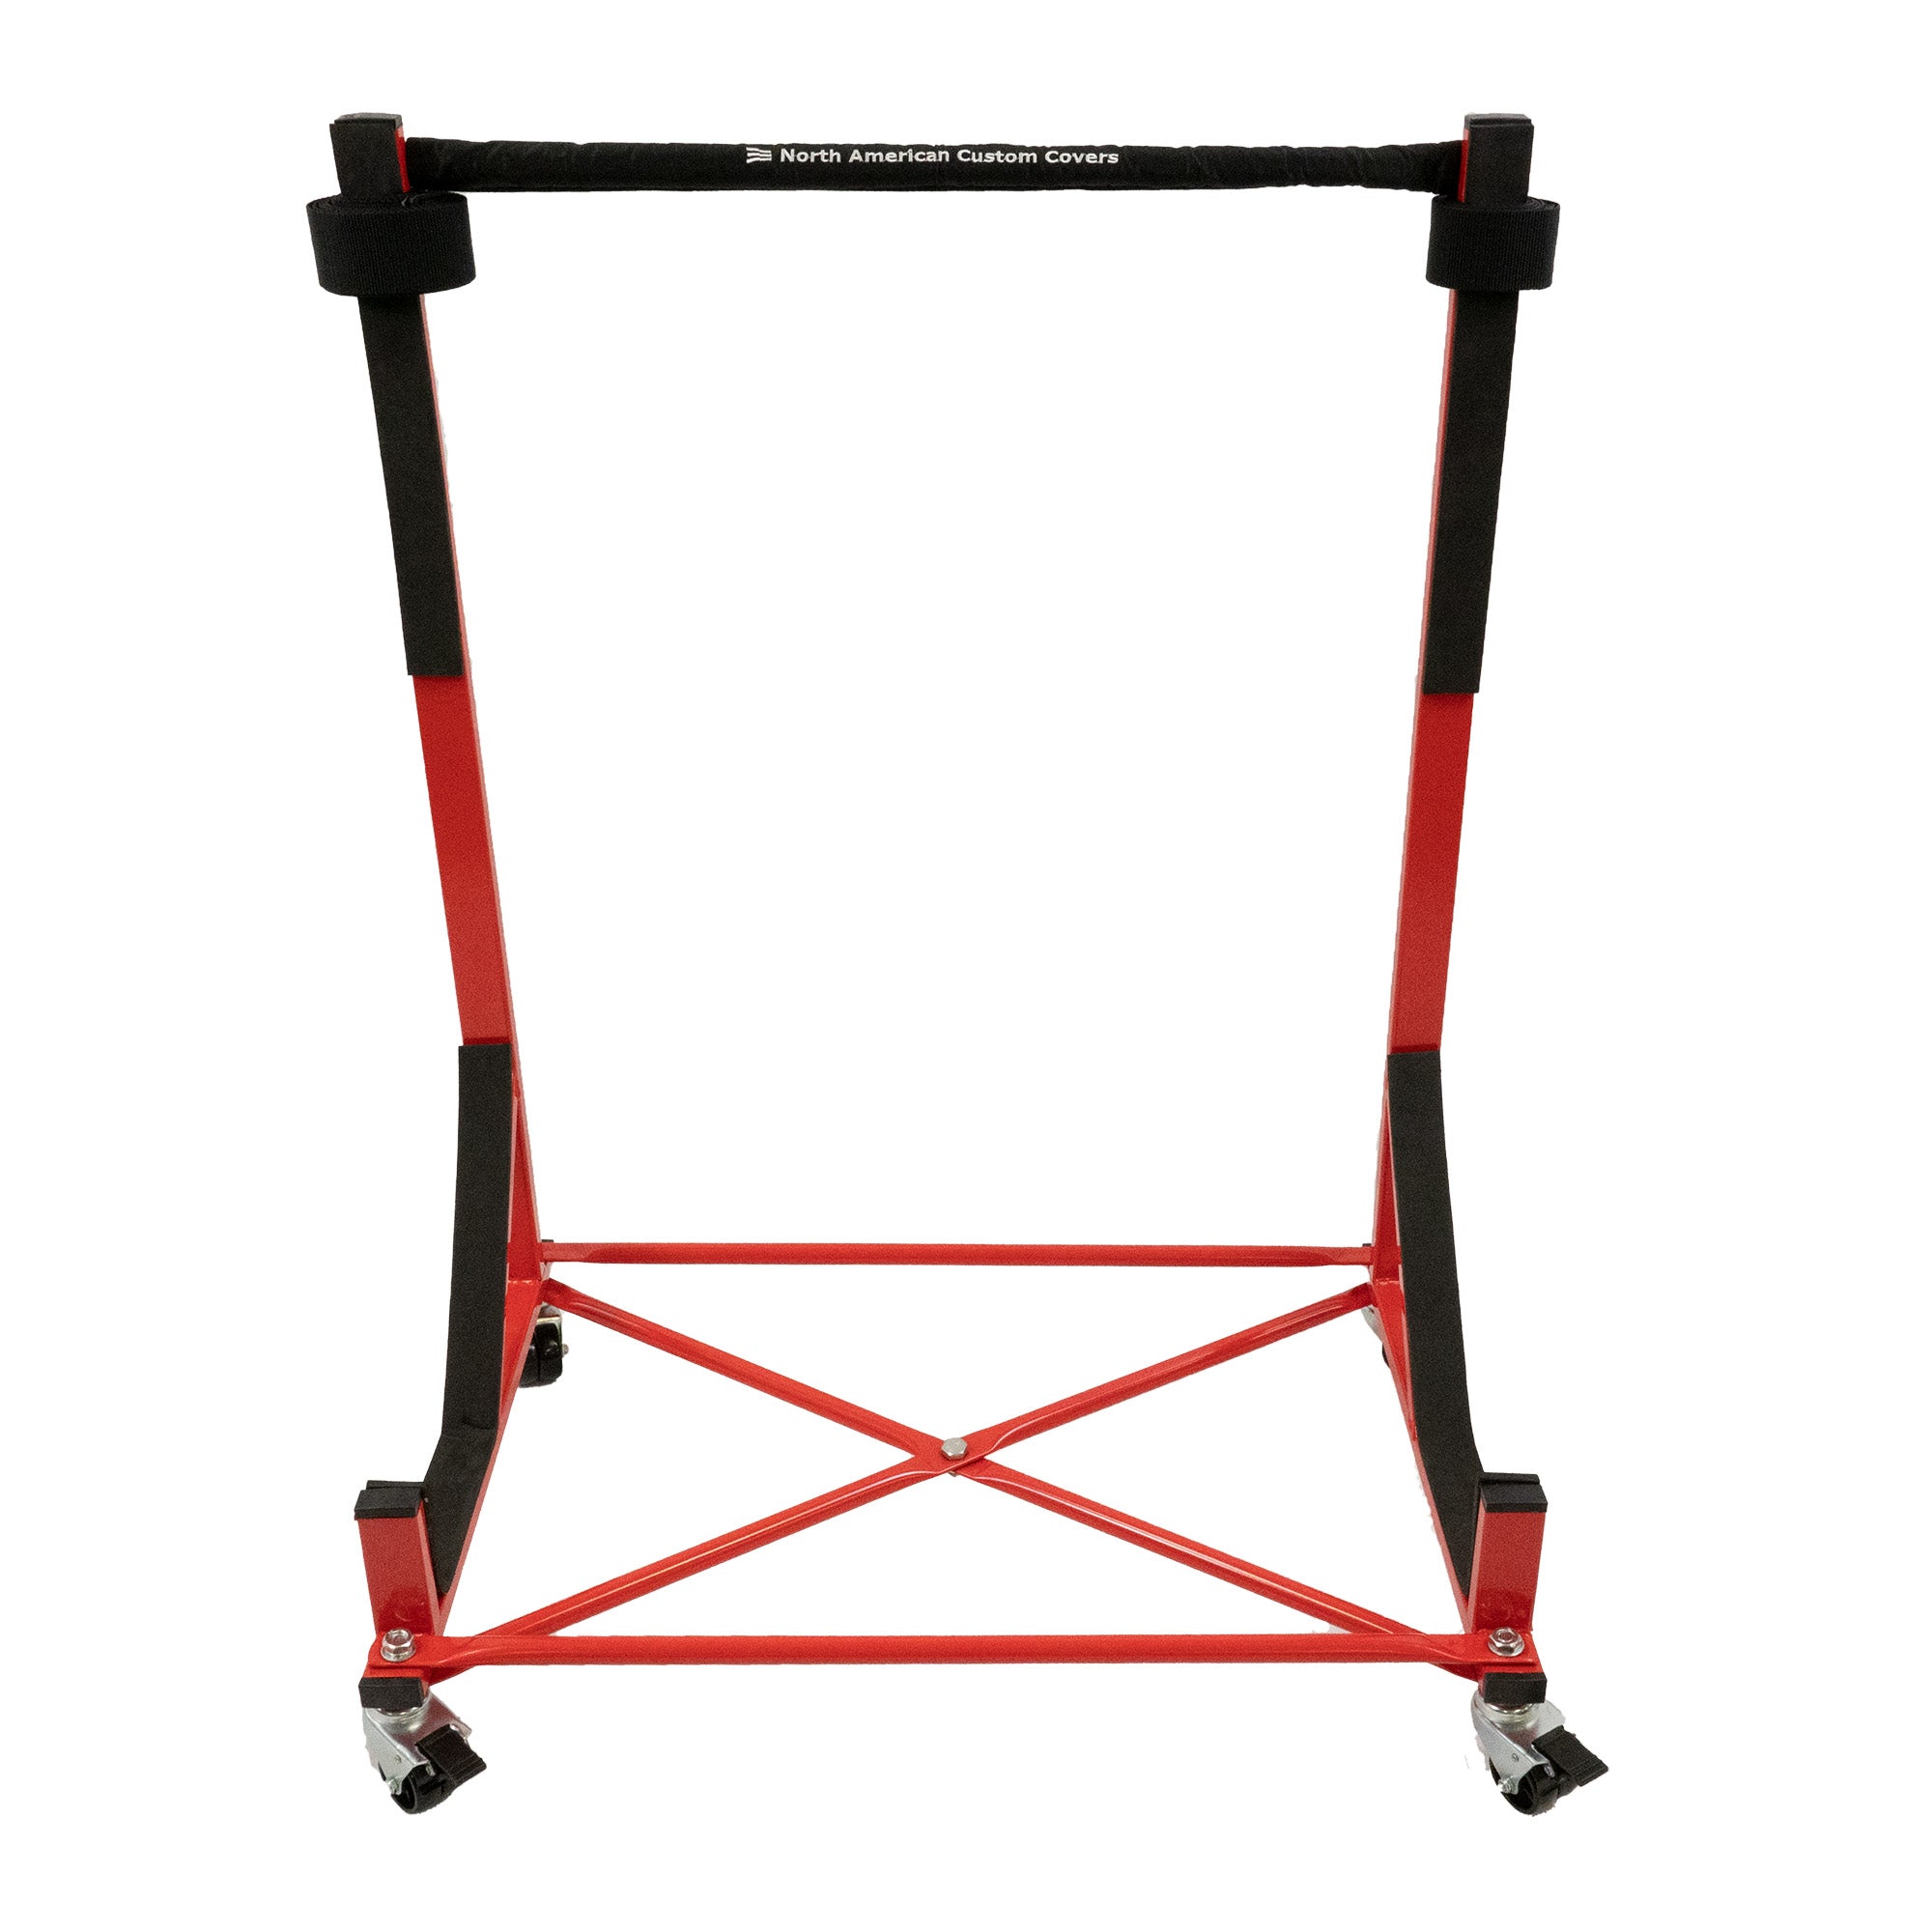 Sunbeam Tiger Heavy-duty Hardtop Stand Trolley Cart Rack (Red) with Securing Harness and Hard Top Dust Cover (050R)